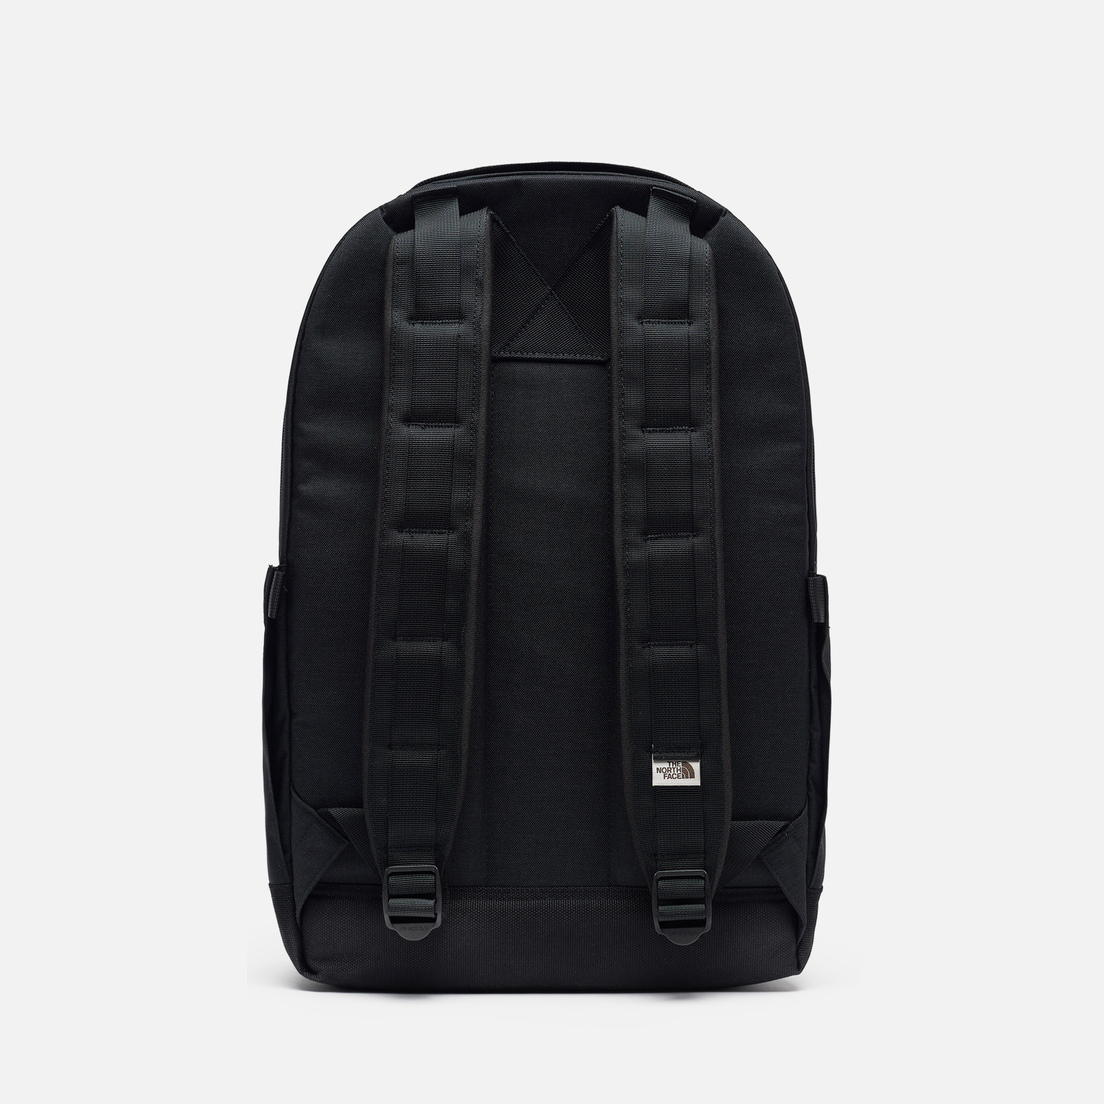 north face 22l backpack